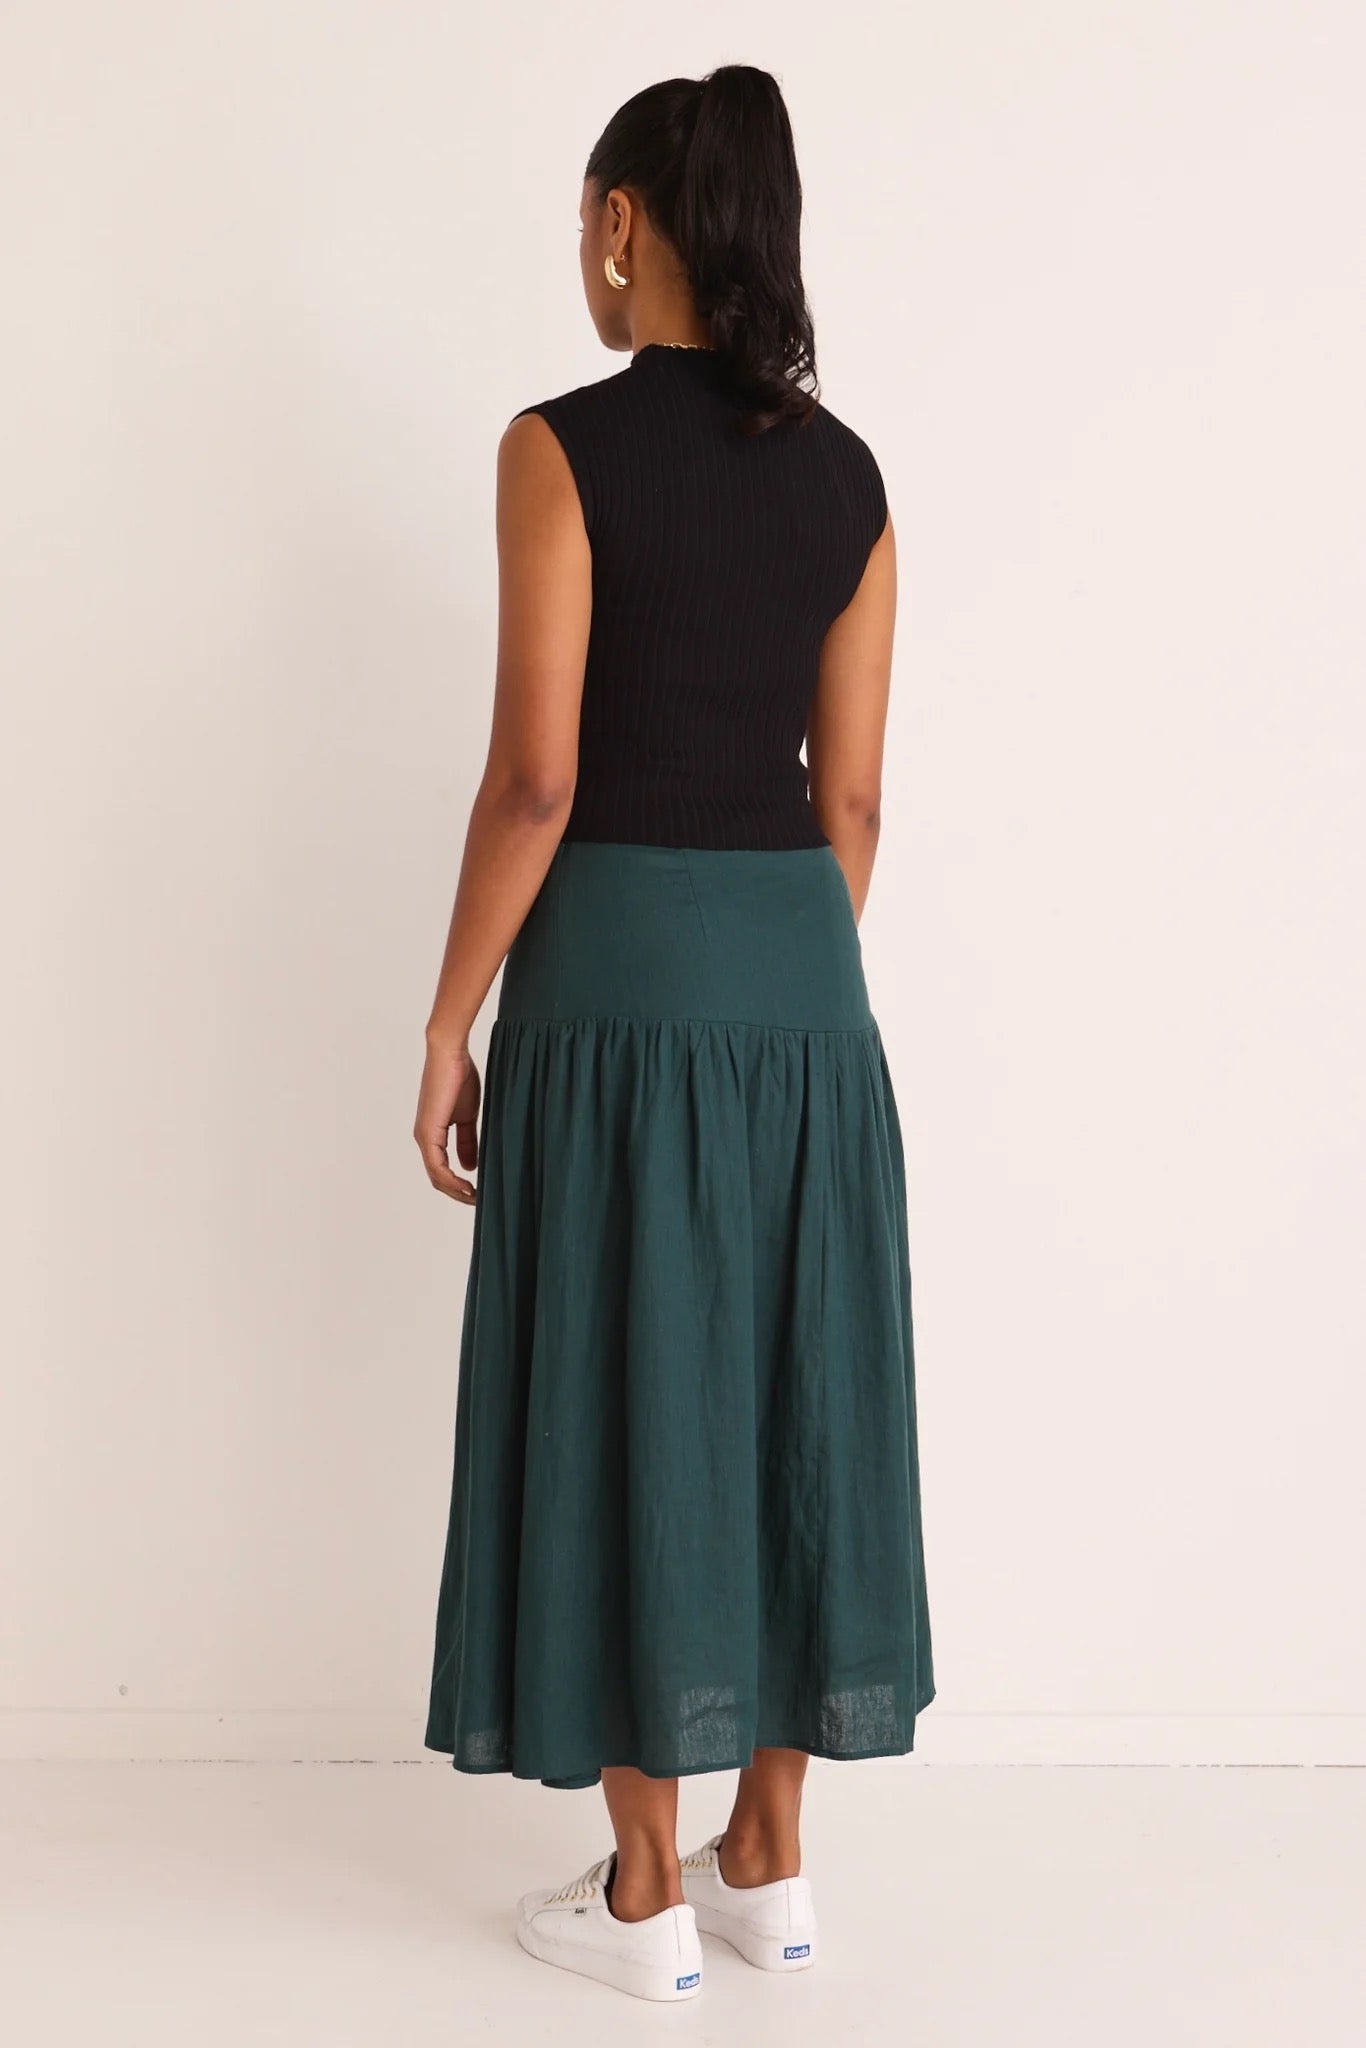 Sway forest basque midi skirt